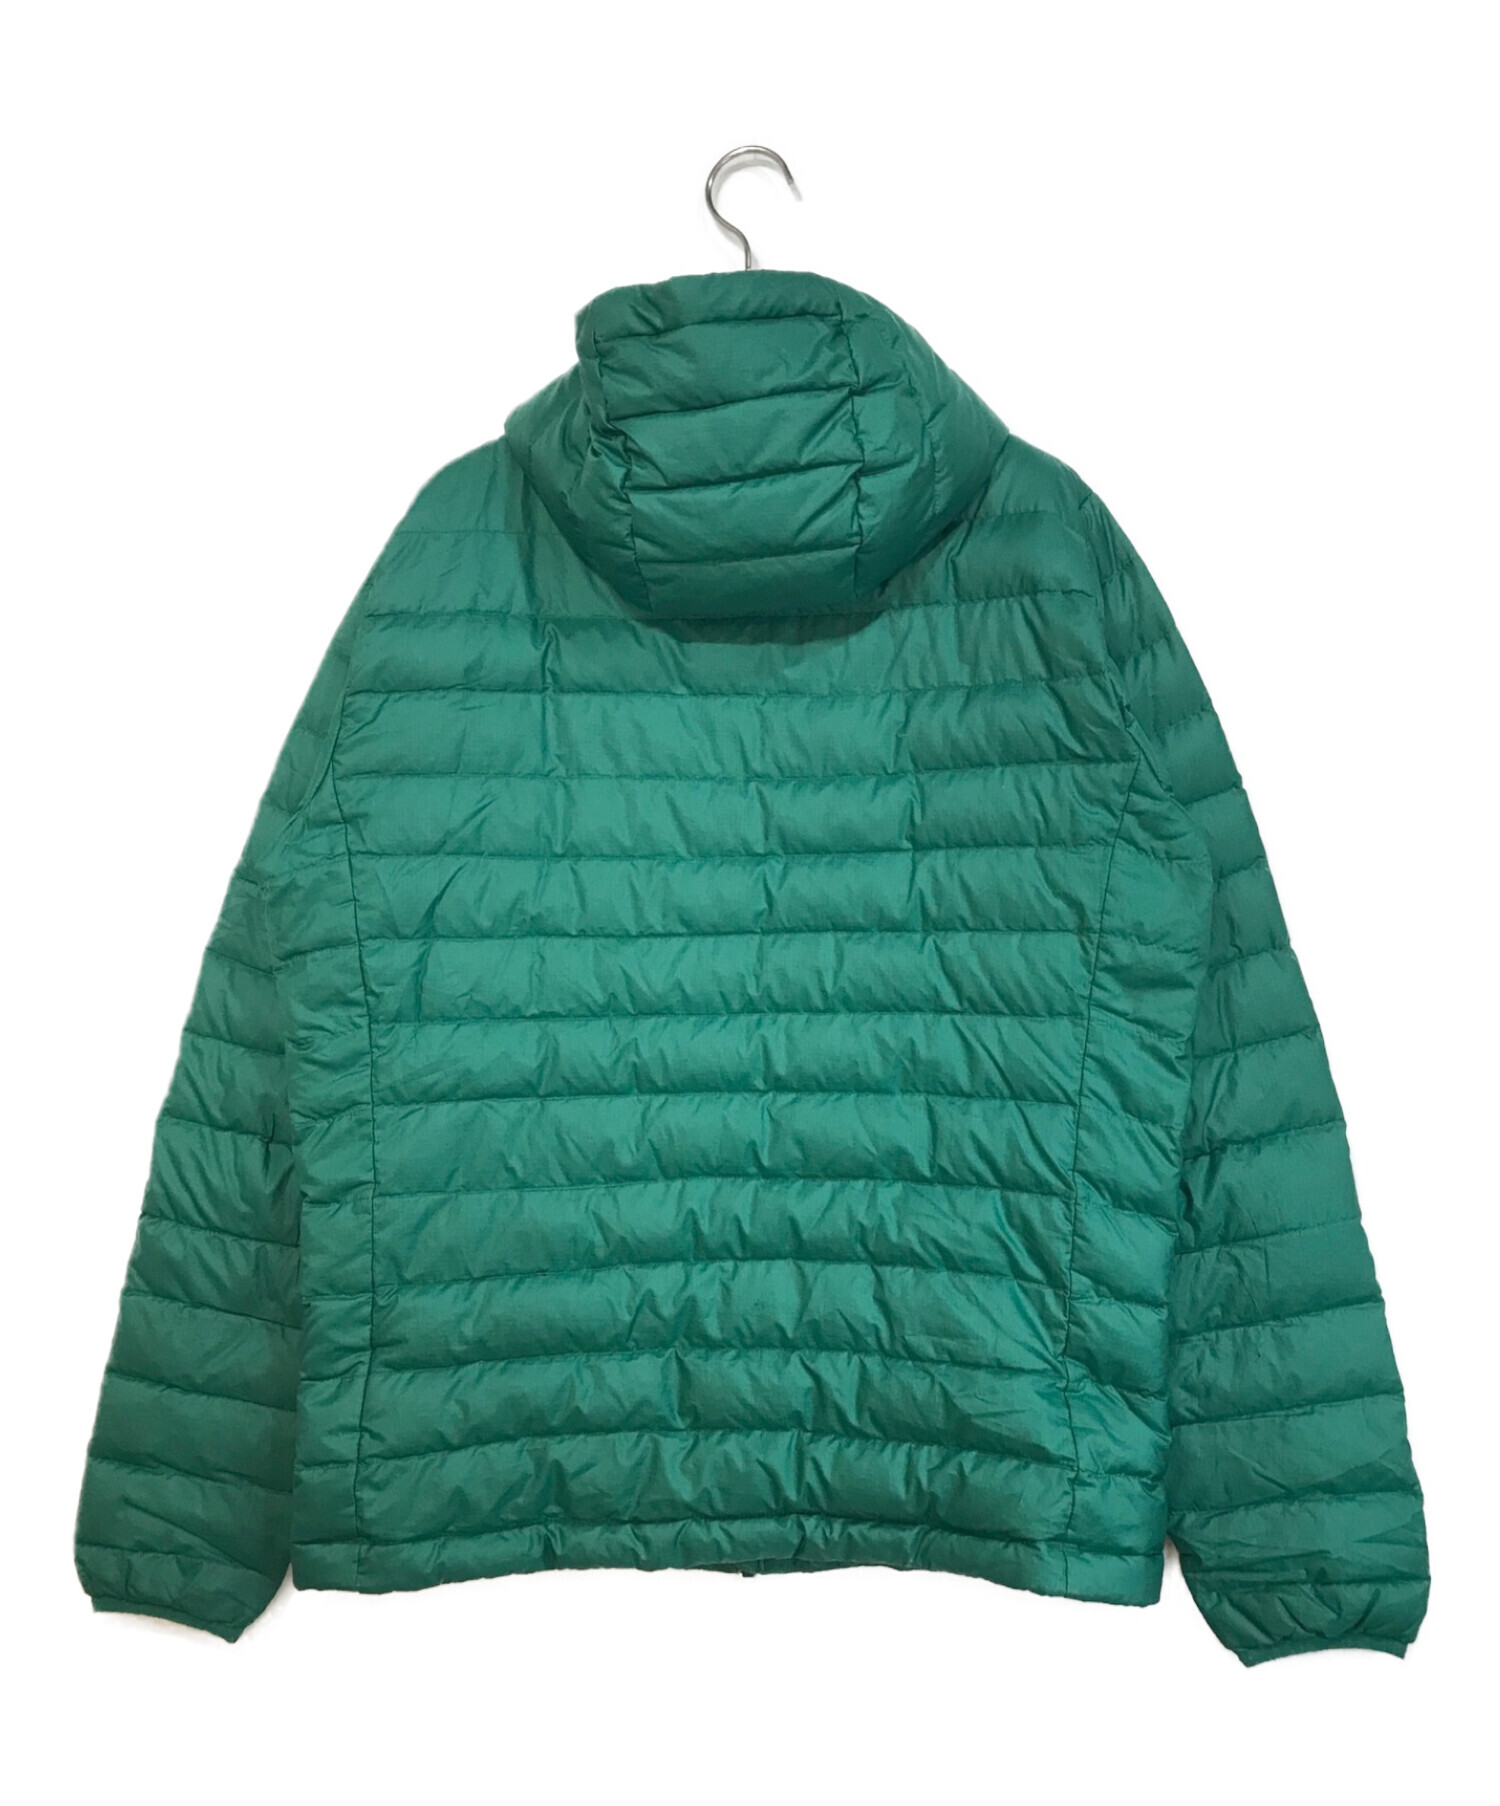 patagonia Down Sweater Hoody Pullover Mカラーはパープルです